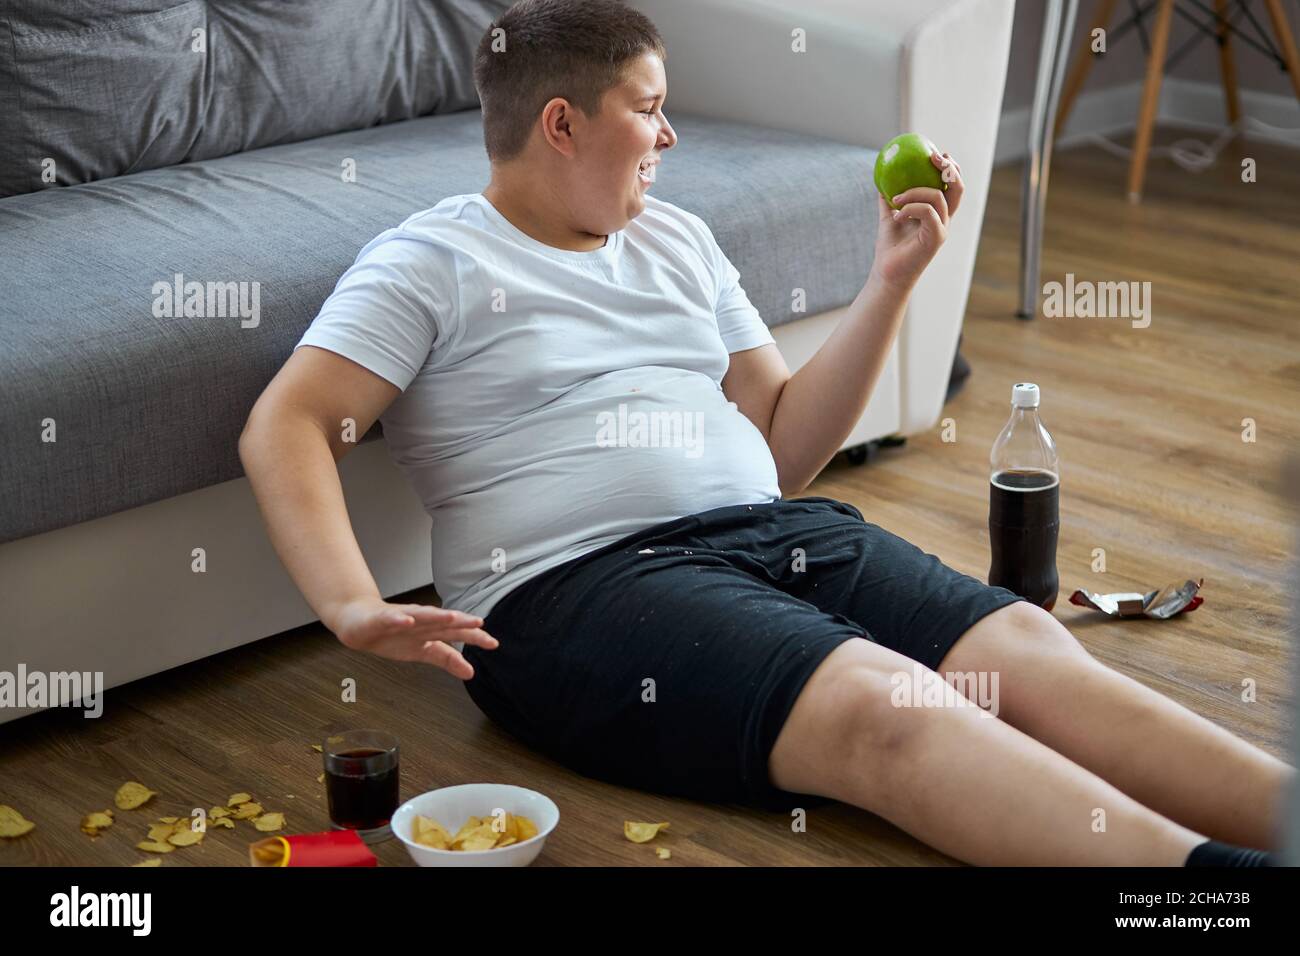 say no to junk food. caucasian fat boy choose apple healthy food instead of junk food. on the floor Stock Photo